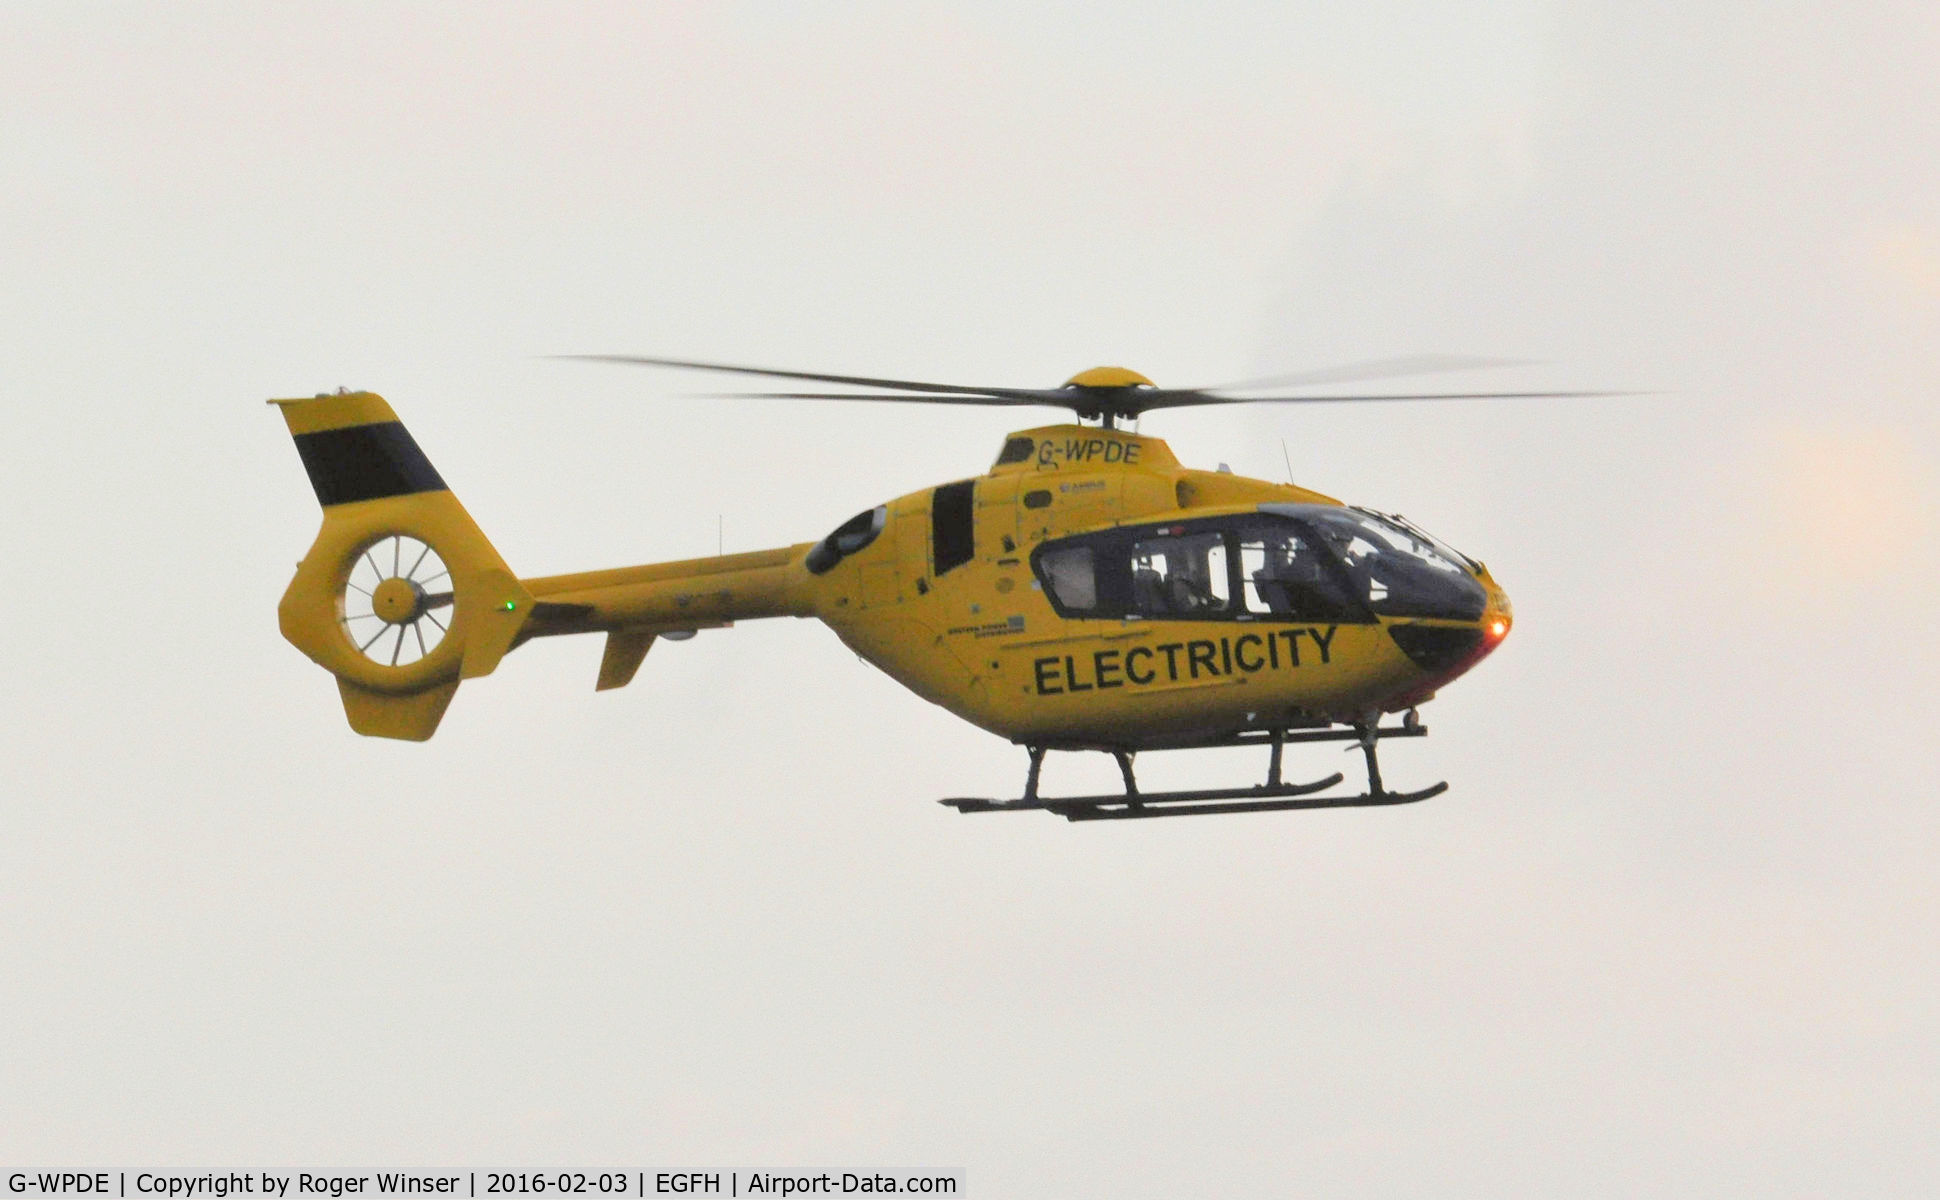 G-WPDE, 2015 Airbus Helicopters EC-135P-2+ C/N 1145, The latest helicopter operated by Western Power Distribution Helicopter Unit.